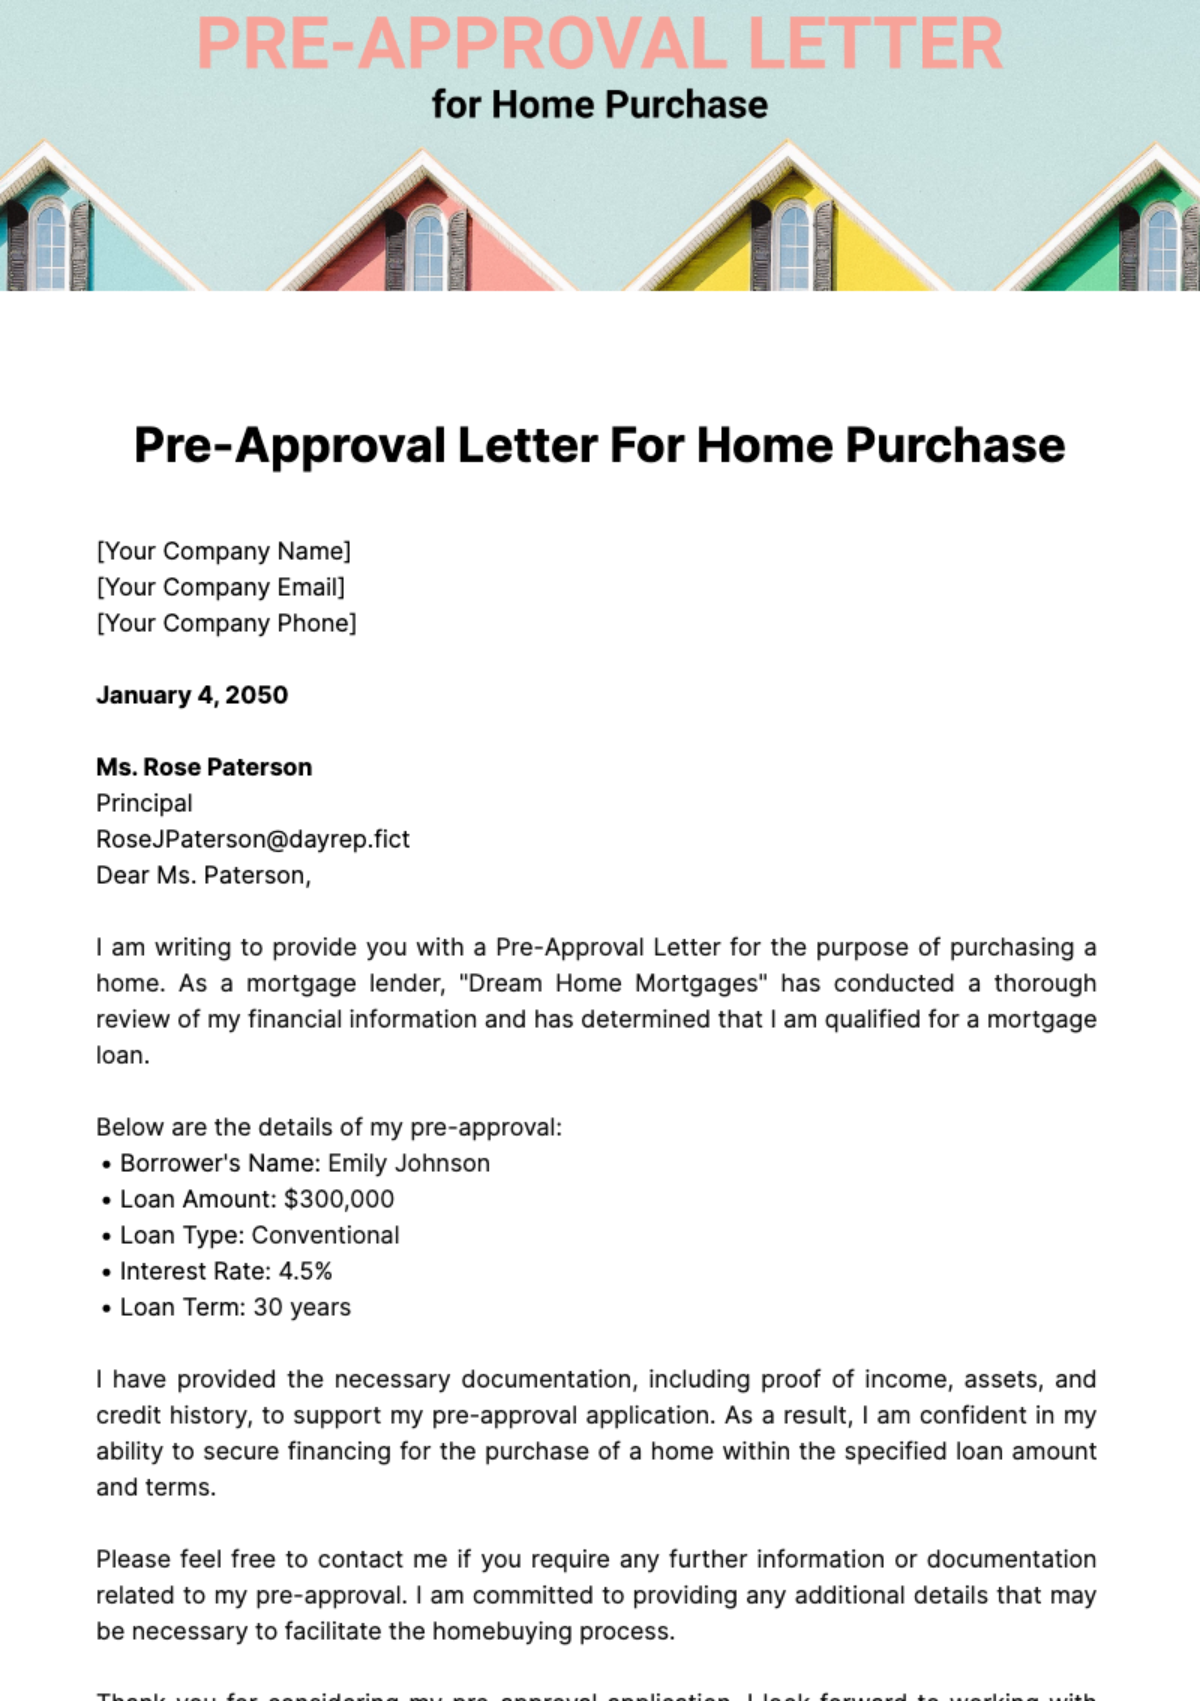 Pre-Approval Letter for Home Purchase Template